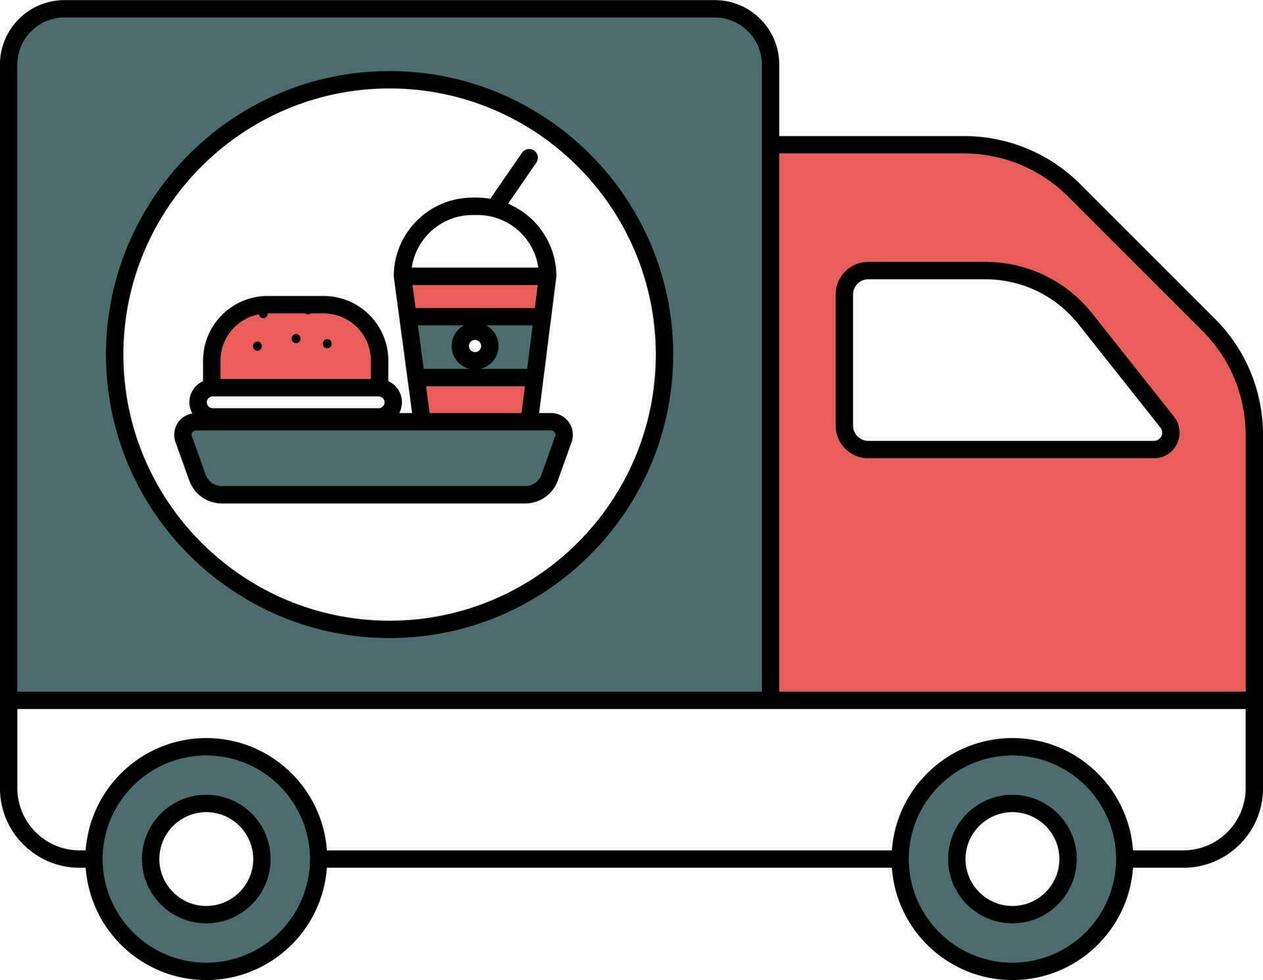 Fast Food Delivery Truck Icon In Teal And Red Color. vector